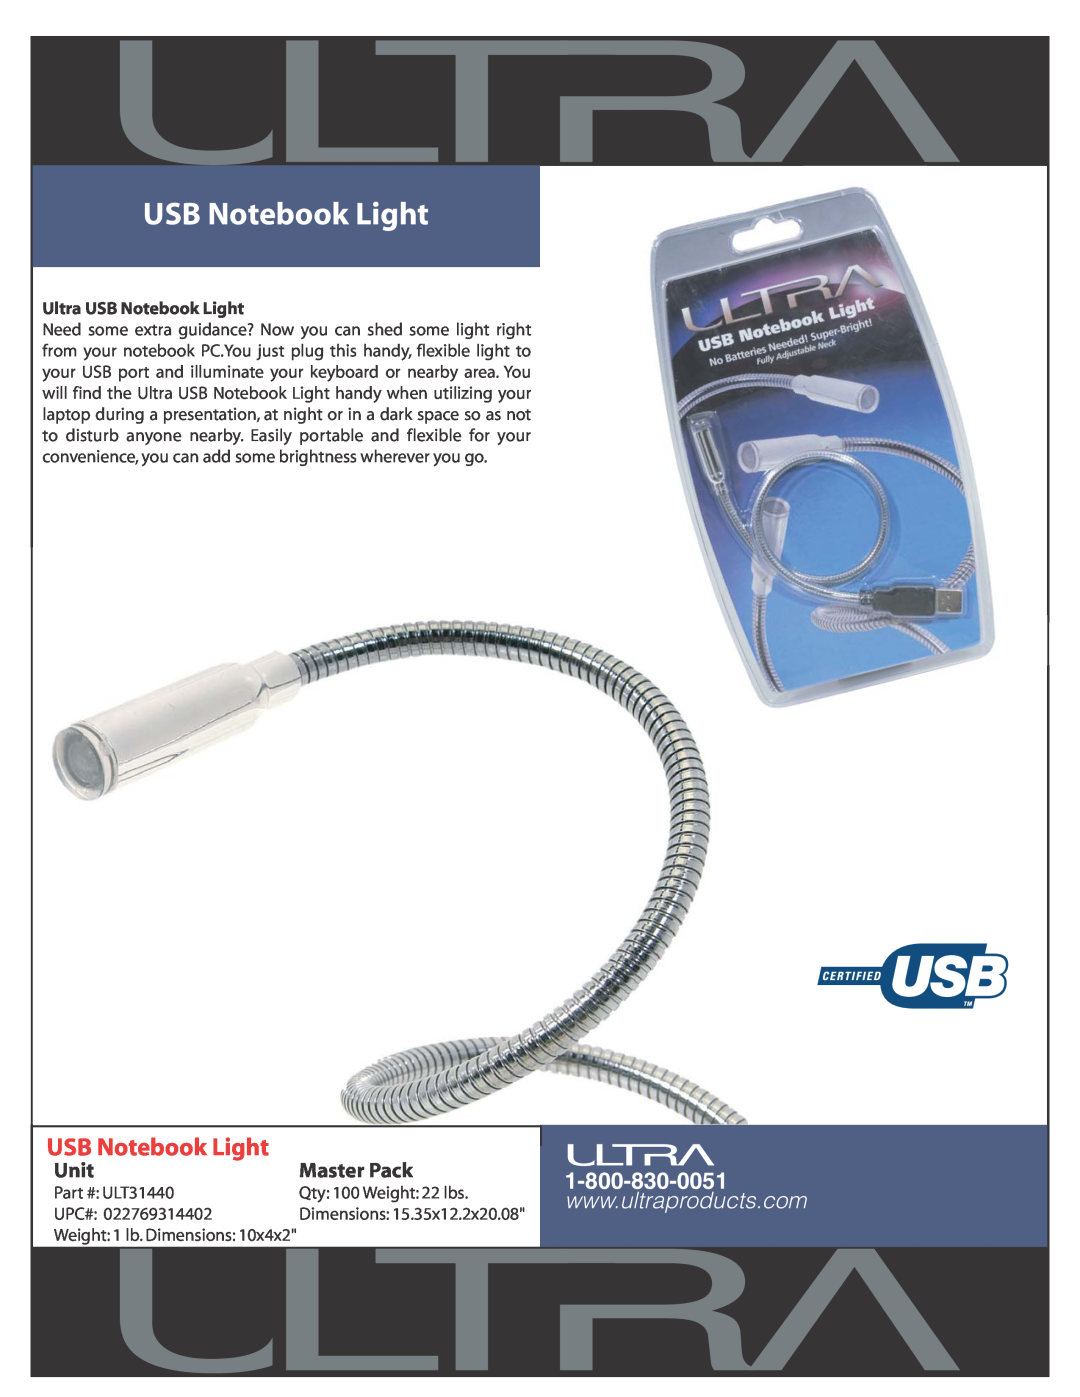 Ultra Products ULT31440 dimensions Unit, Master Pack, Ultra USB Notebook Light, Qty 100 Weight 22 lbs, Upc# 